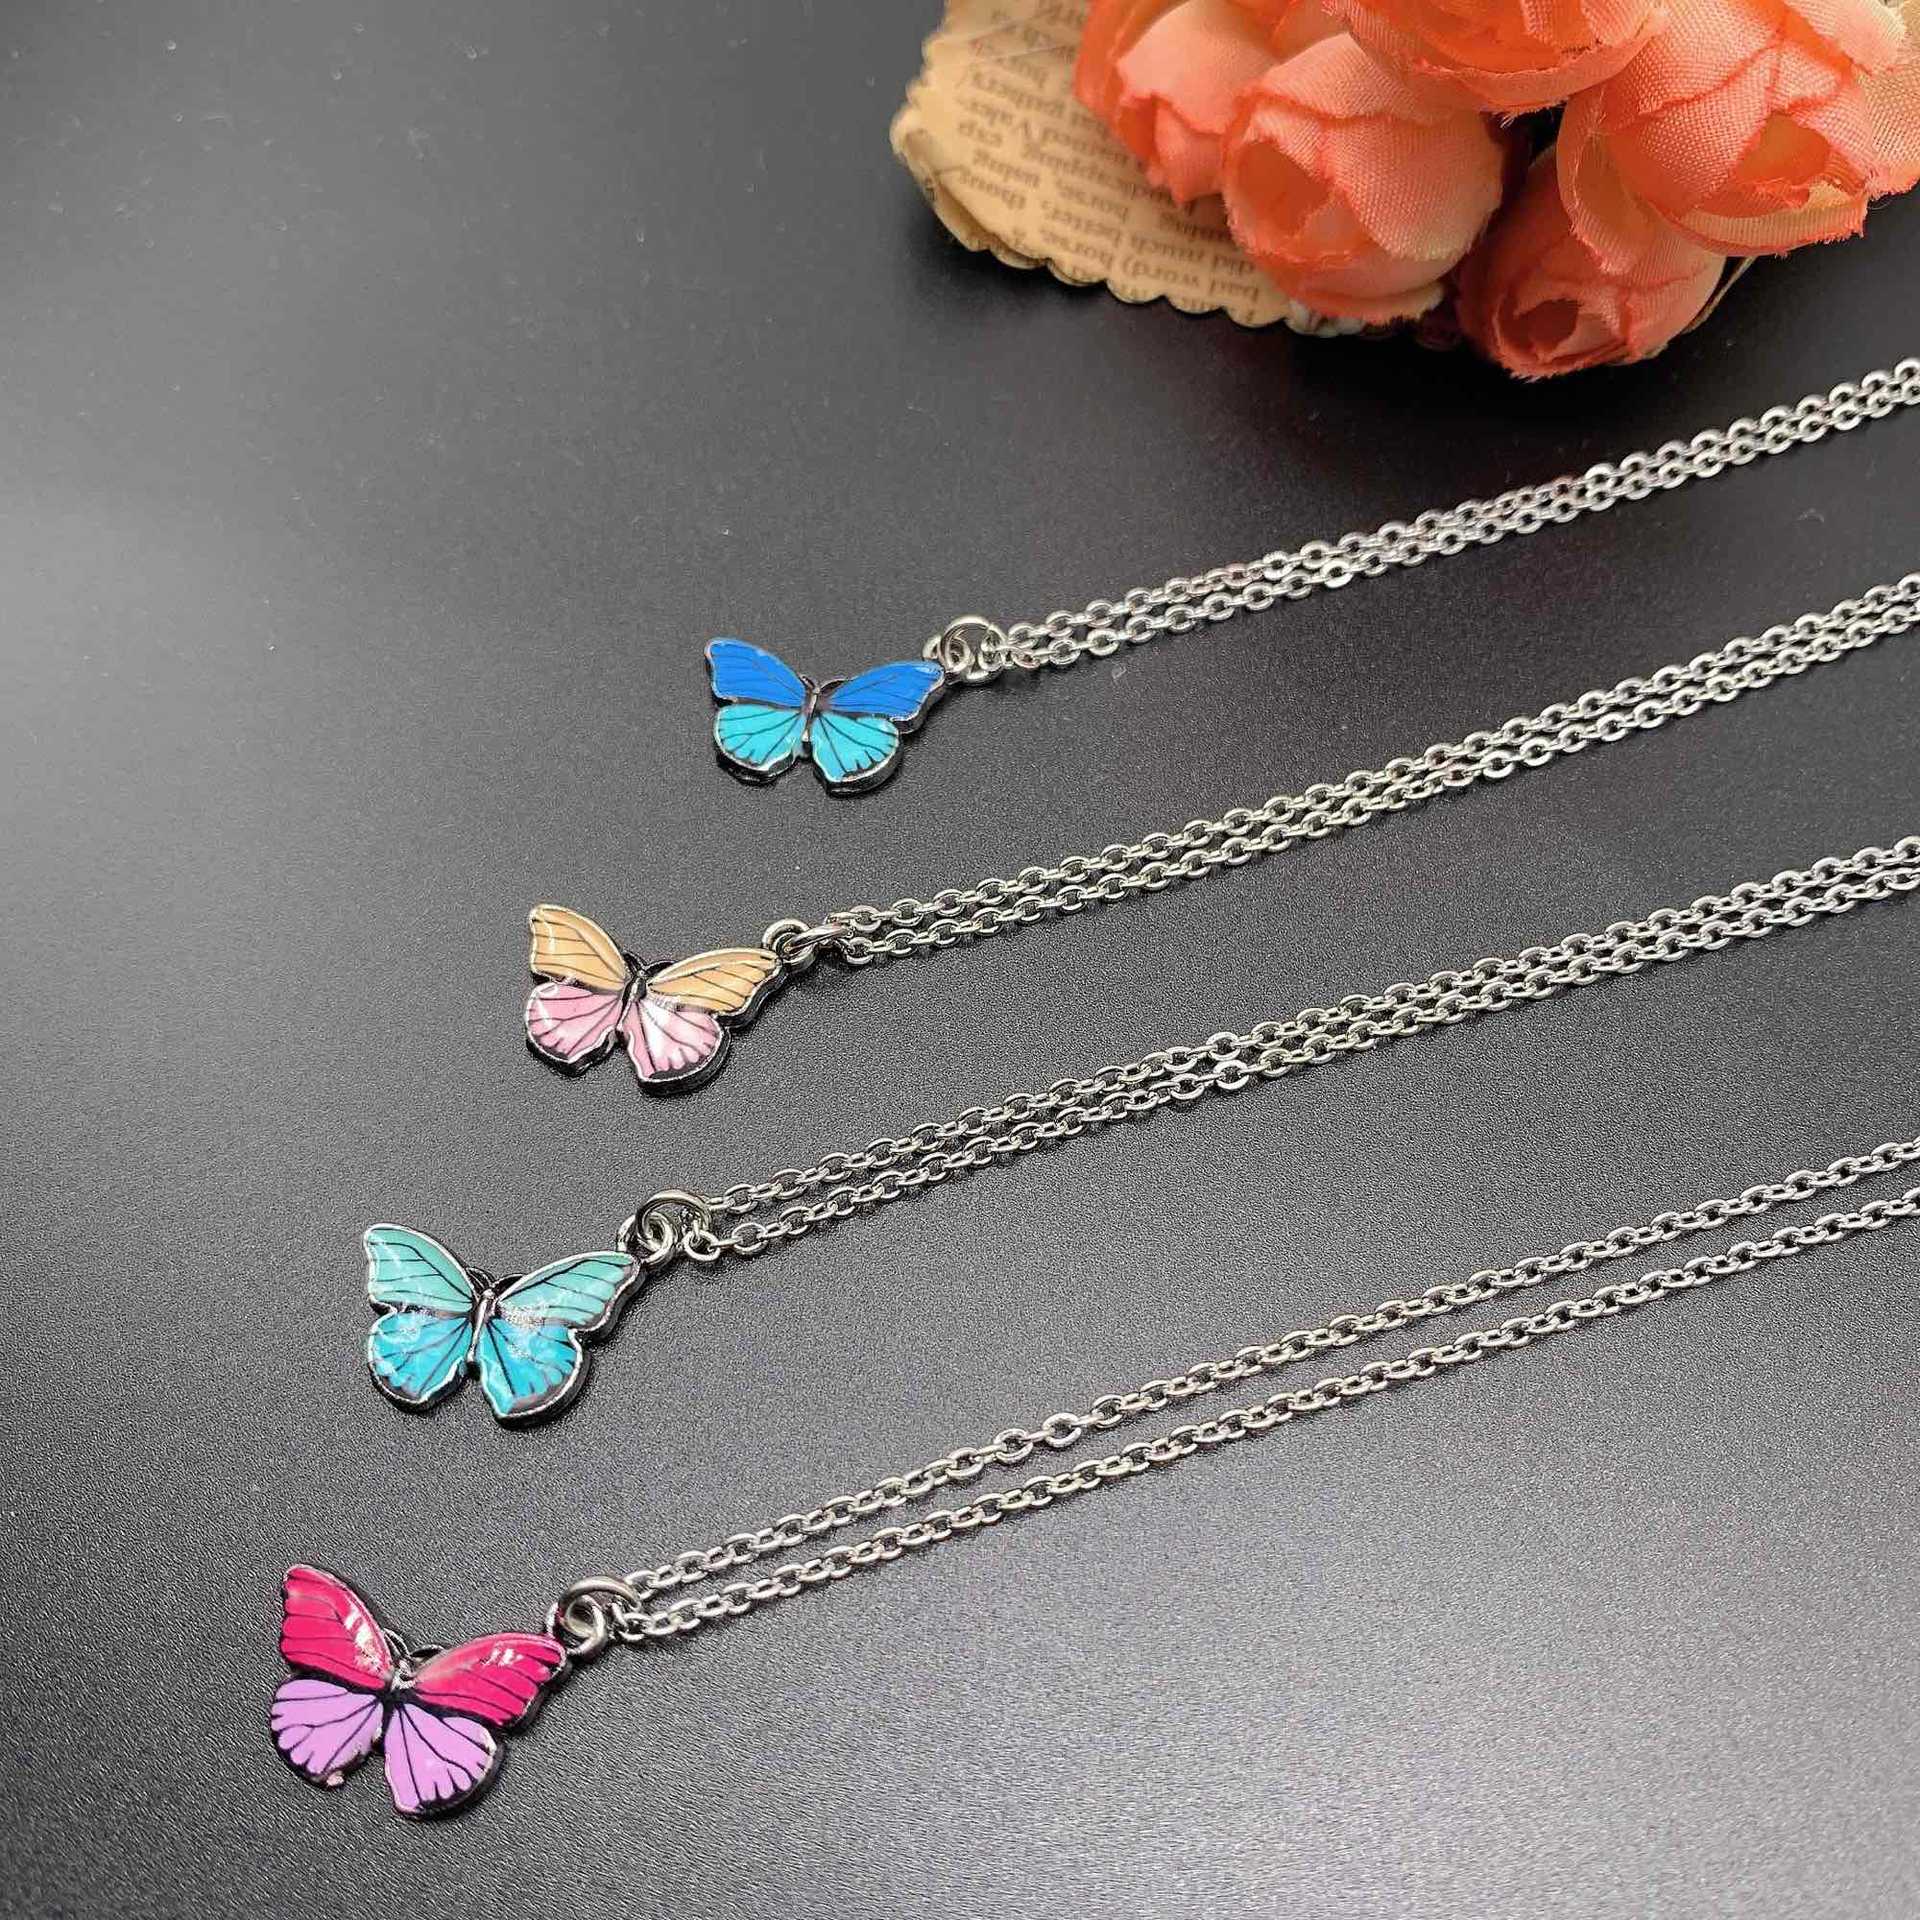 Colored Butterfly Pendant Slim Chain Necklace - nightcity clothing